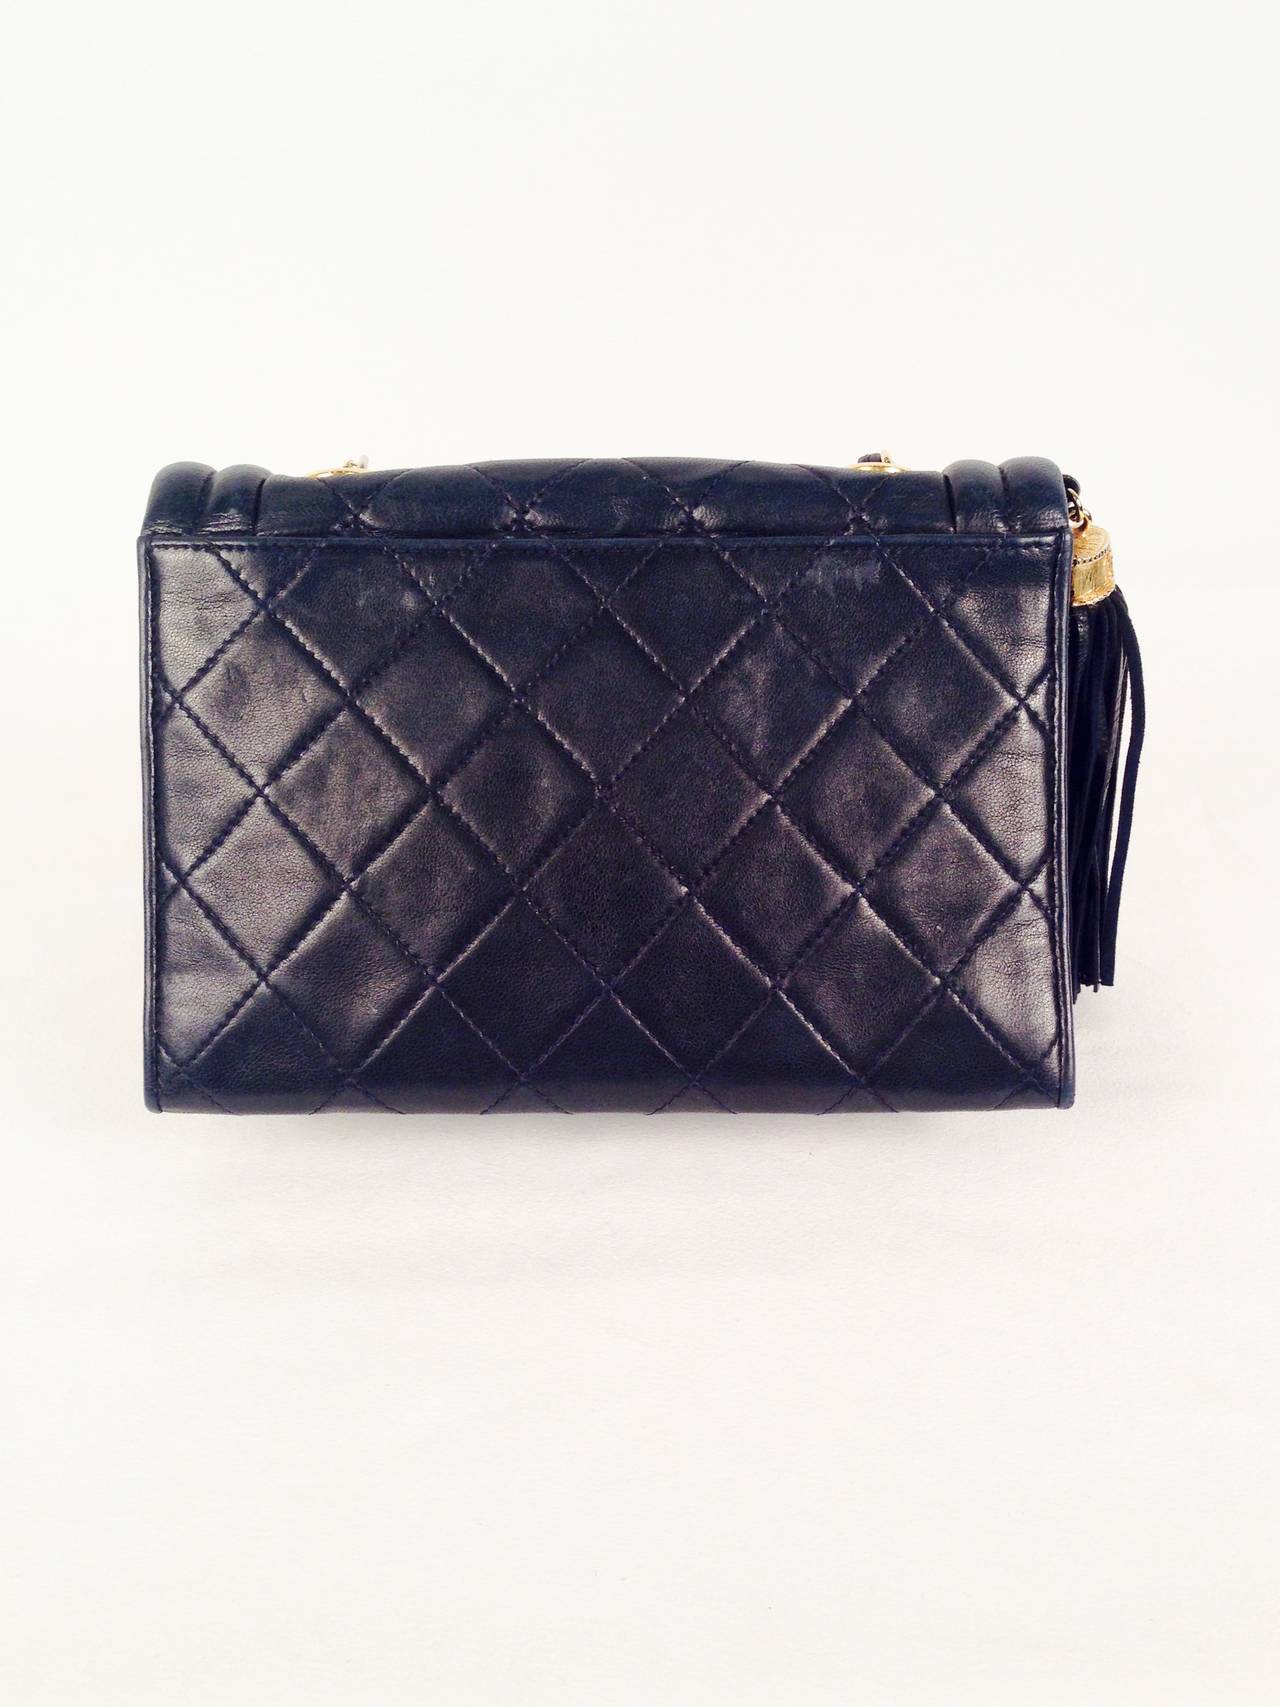 Vintage Chanel Navy Quilted Lambskin Single Flap Bag With Tassel In Excellent Condition For Sale In Palm Beach, FL